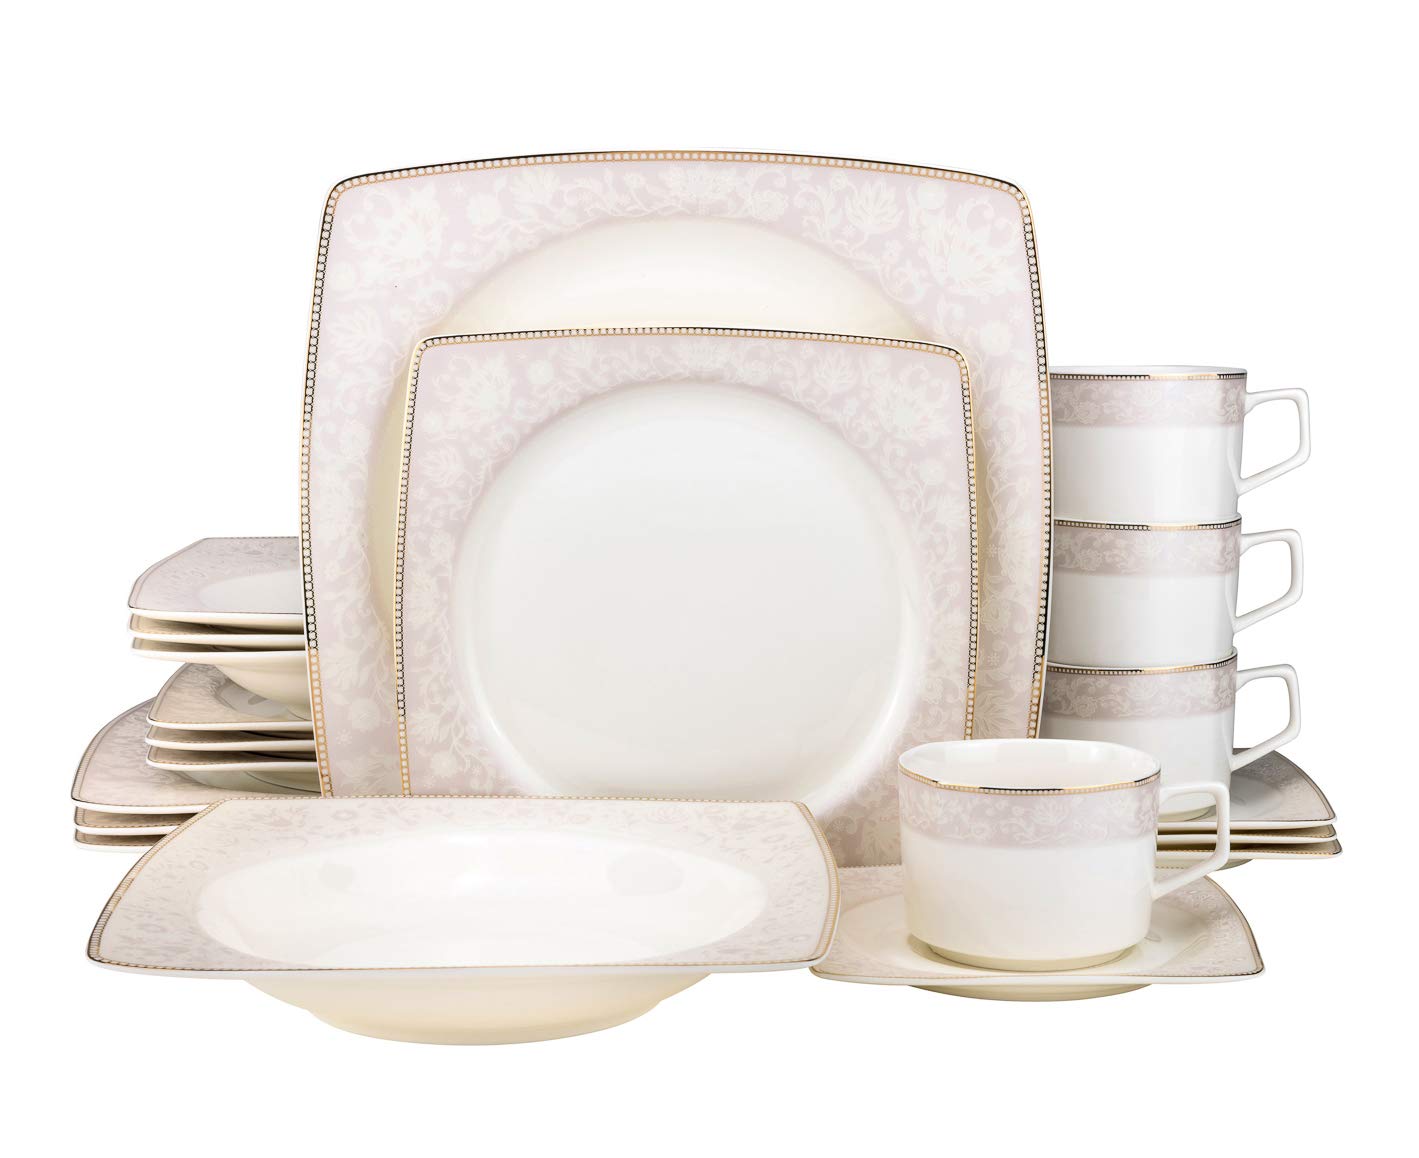 20-pc. Dinner Set Service for 4, 24K Gold-plated Luxury Bone China Tableware ("Wedding Band Gold" 6449-20) - image 1 of 2